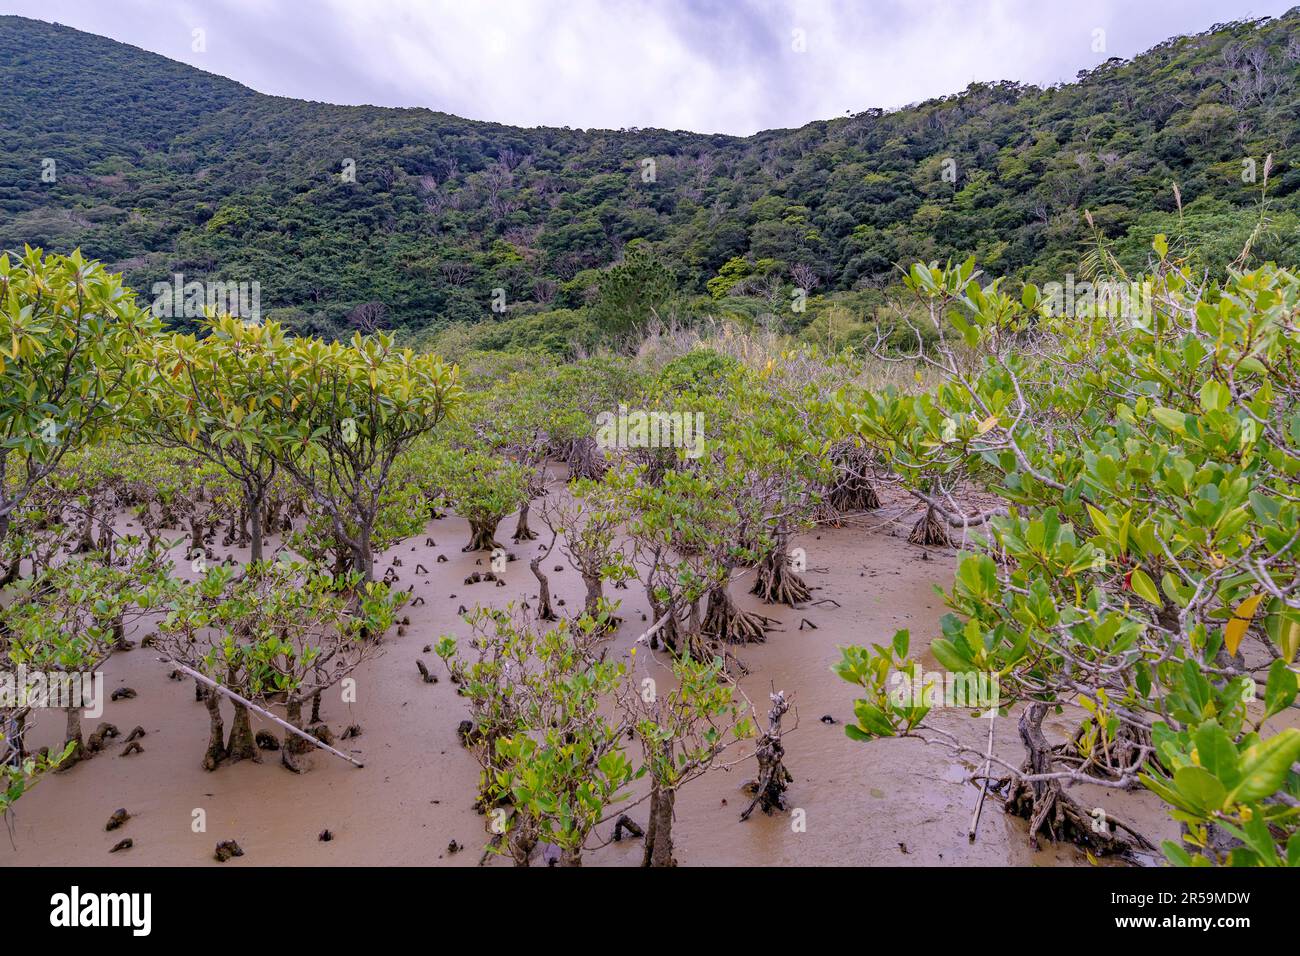 Amami Mangrove Primeval Forest (Amami Island, southern Japan) with two species of mangrove - Kandelia obovata (centre and right) and Large-leafed Oran Stock Photo